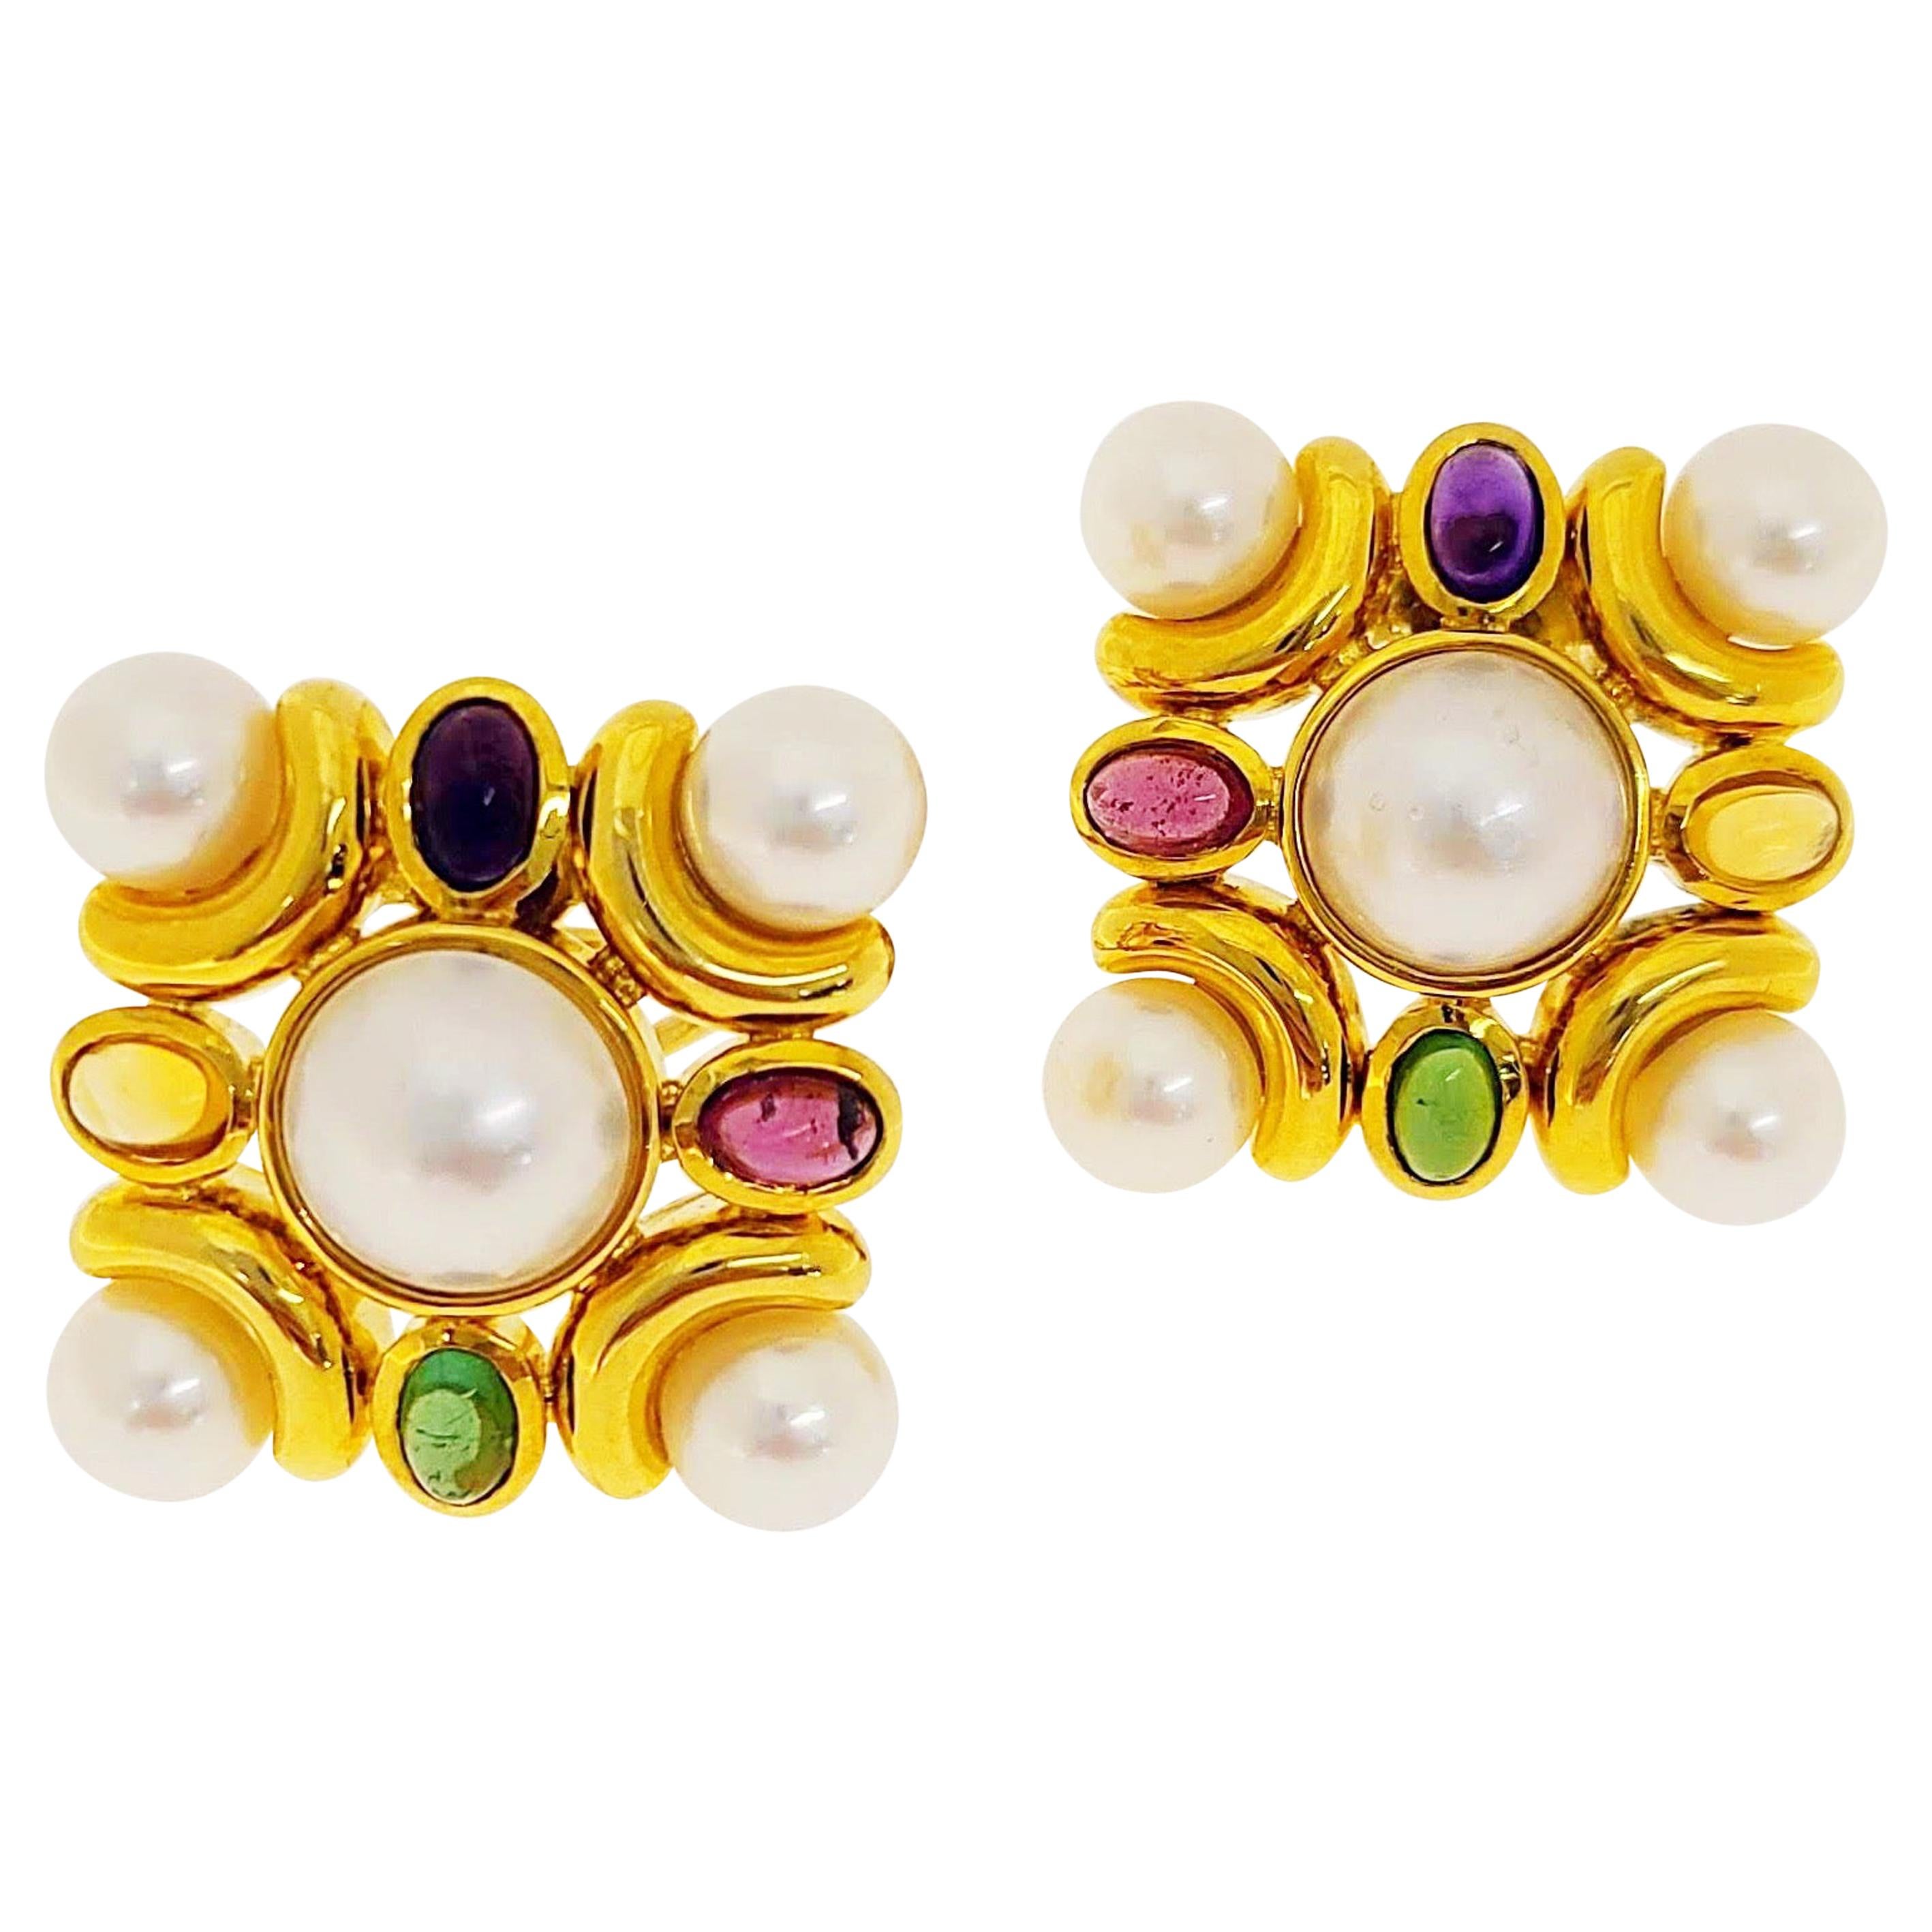 18 Karat Gold Earrings with Mabe Pearls and Multicolored Semi Precious Stones For Sale